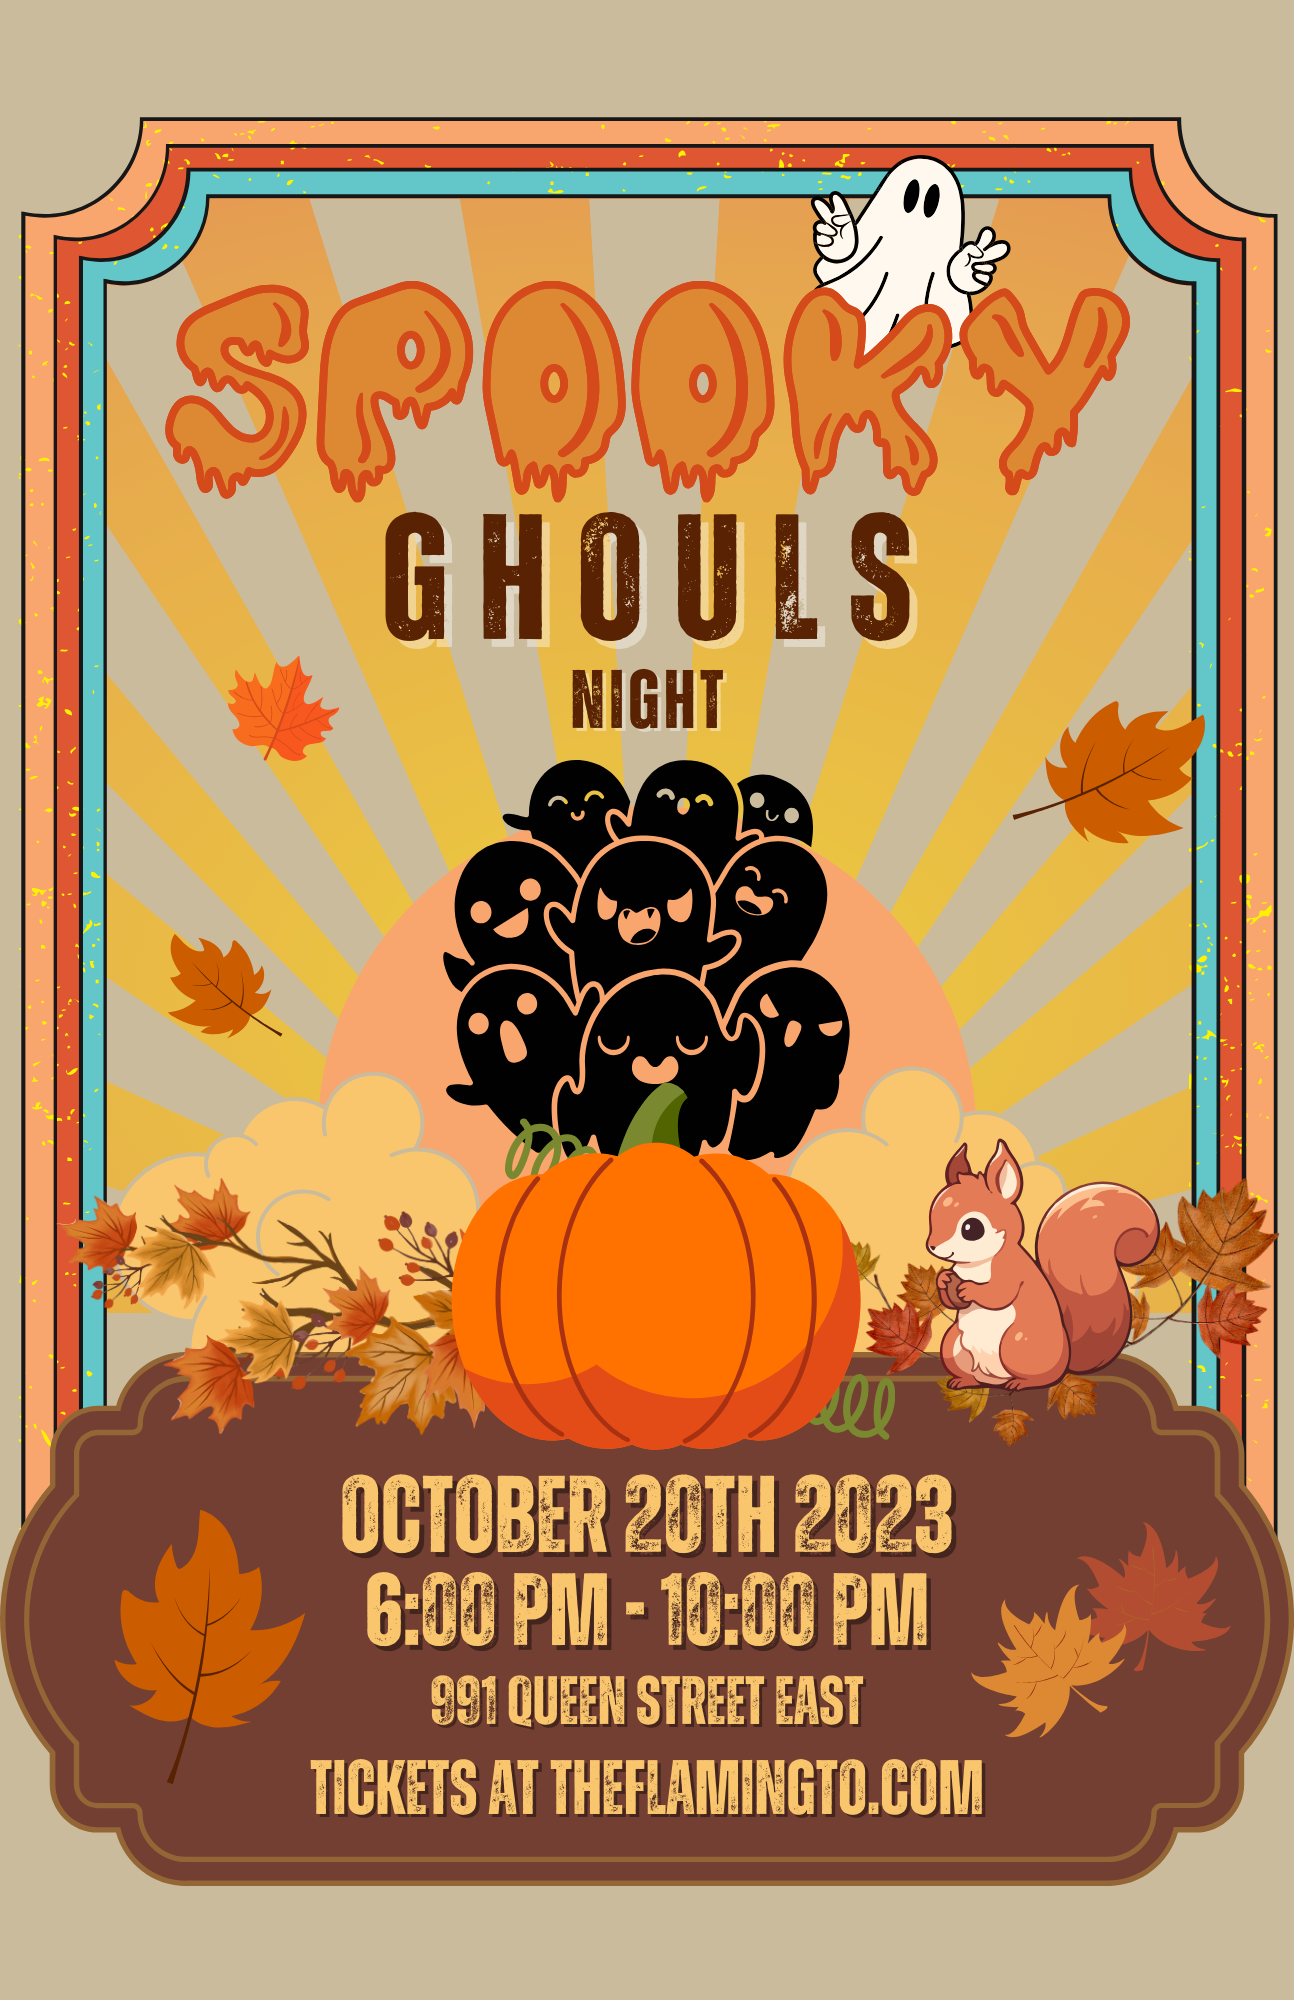 Spooky ghouls night x Candle making workshop x Tarot reading